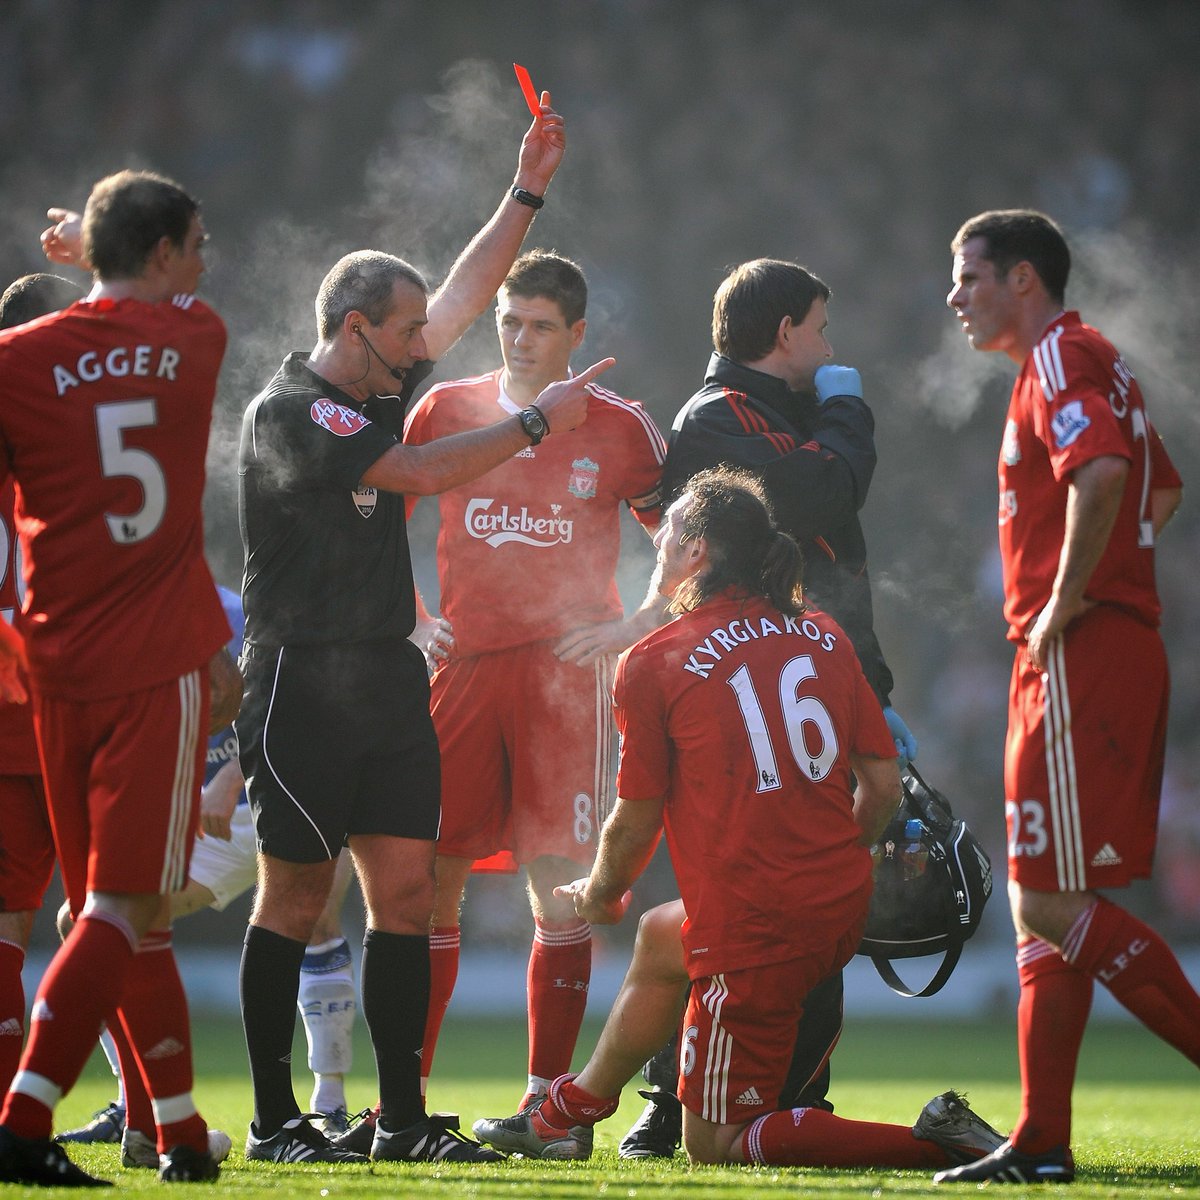 It's been 14 years since #LFC had a man sent off against #EFC, when Kyrgiakos was shown red. Everton have received 5⃣ red cards since then (Pienaar 2010, Rodwell 2011, Funes Mori 2016, Richarlison 2020, Young 2023) The Merseyside derby has seen the most red cards in PL history